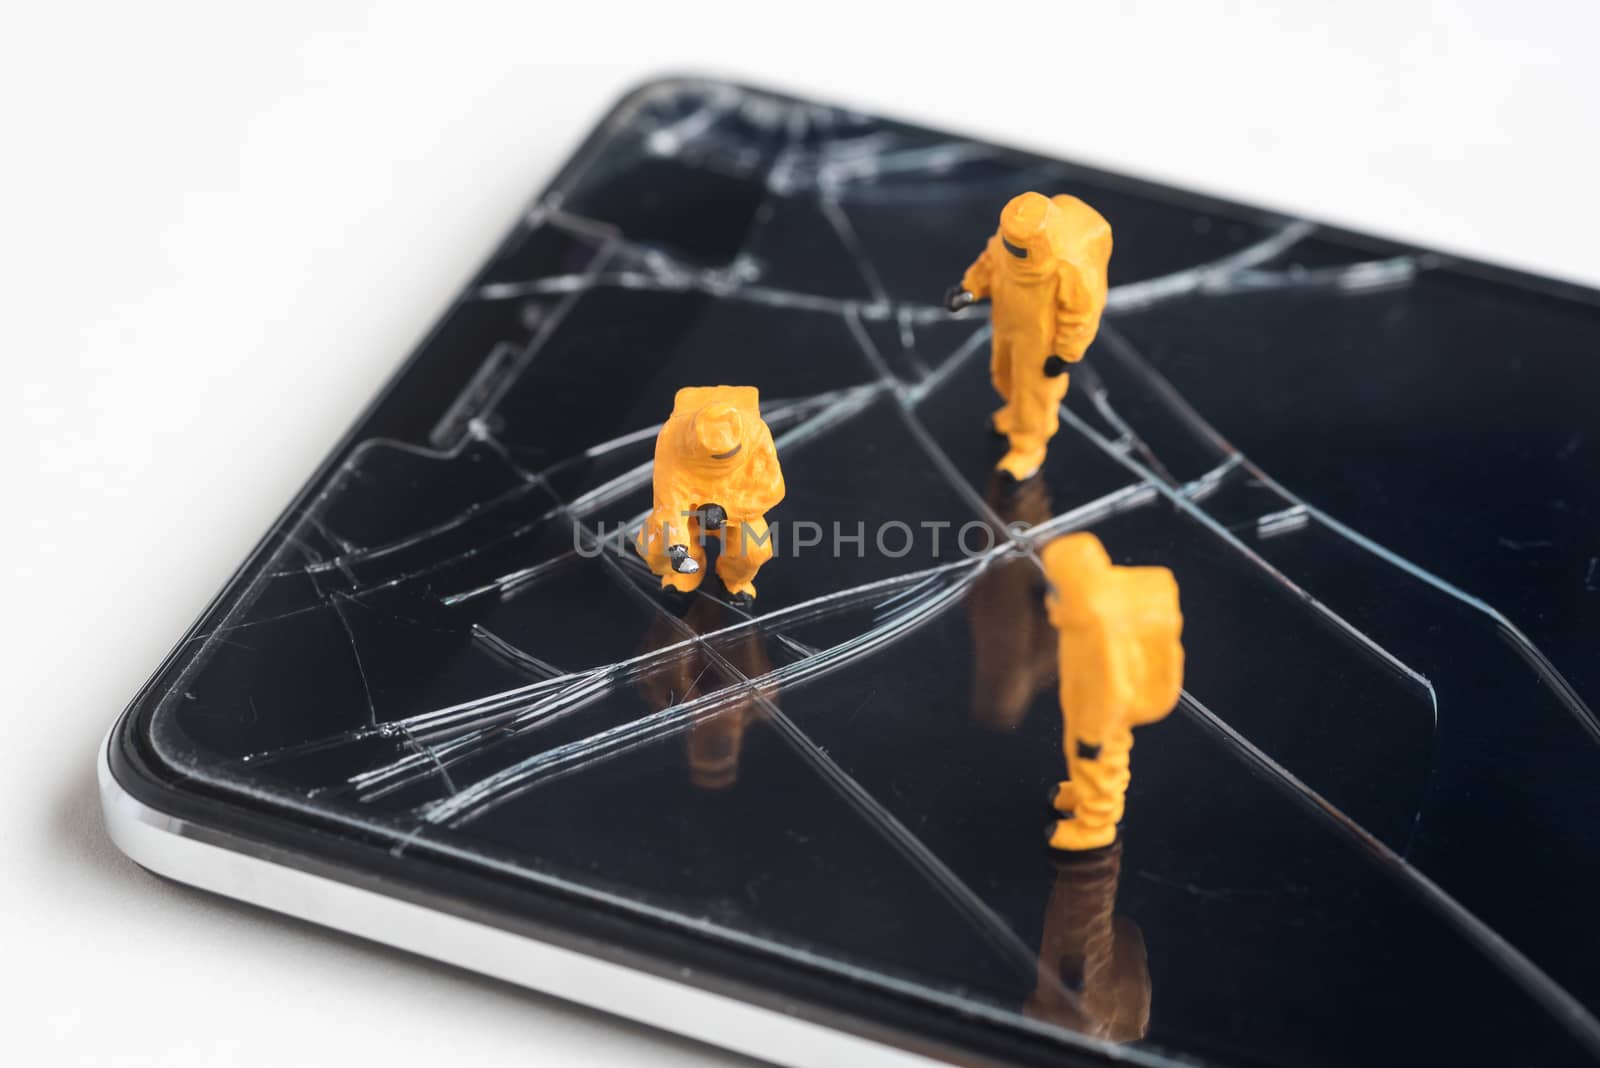 miniature people are inspect  the fracture on smartphone screen